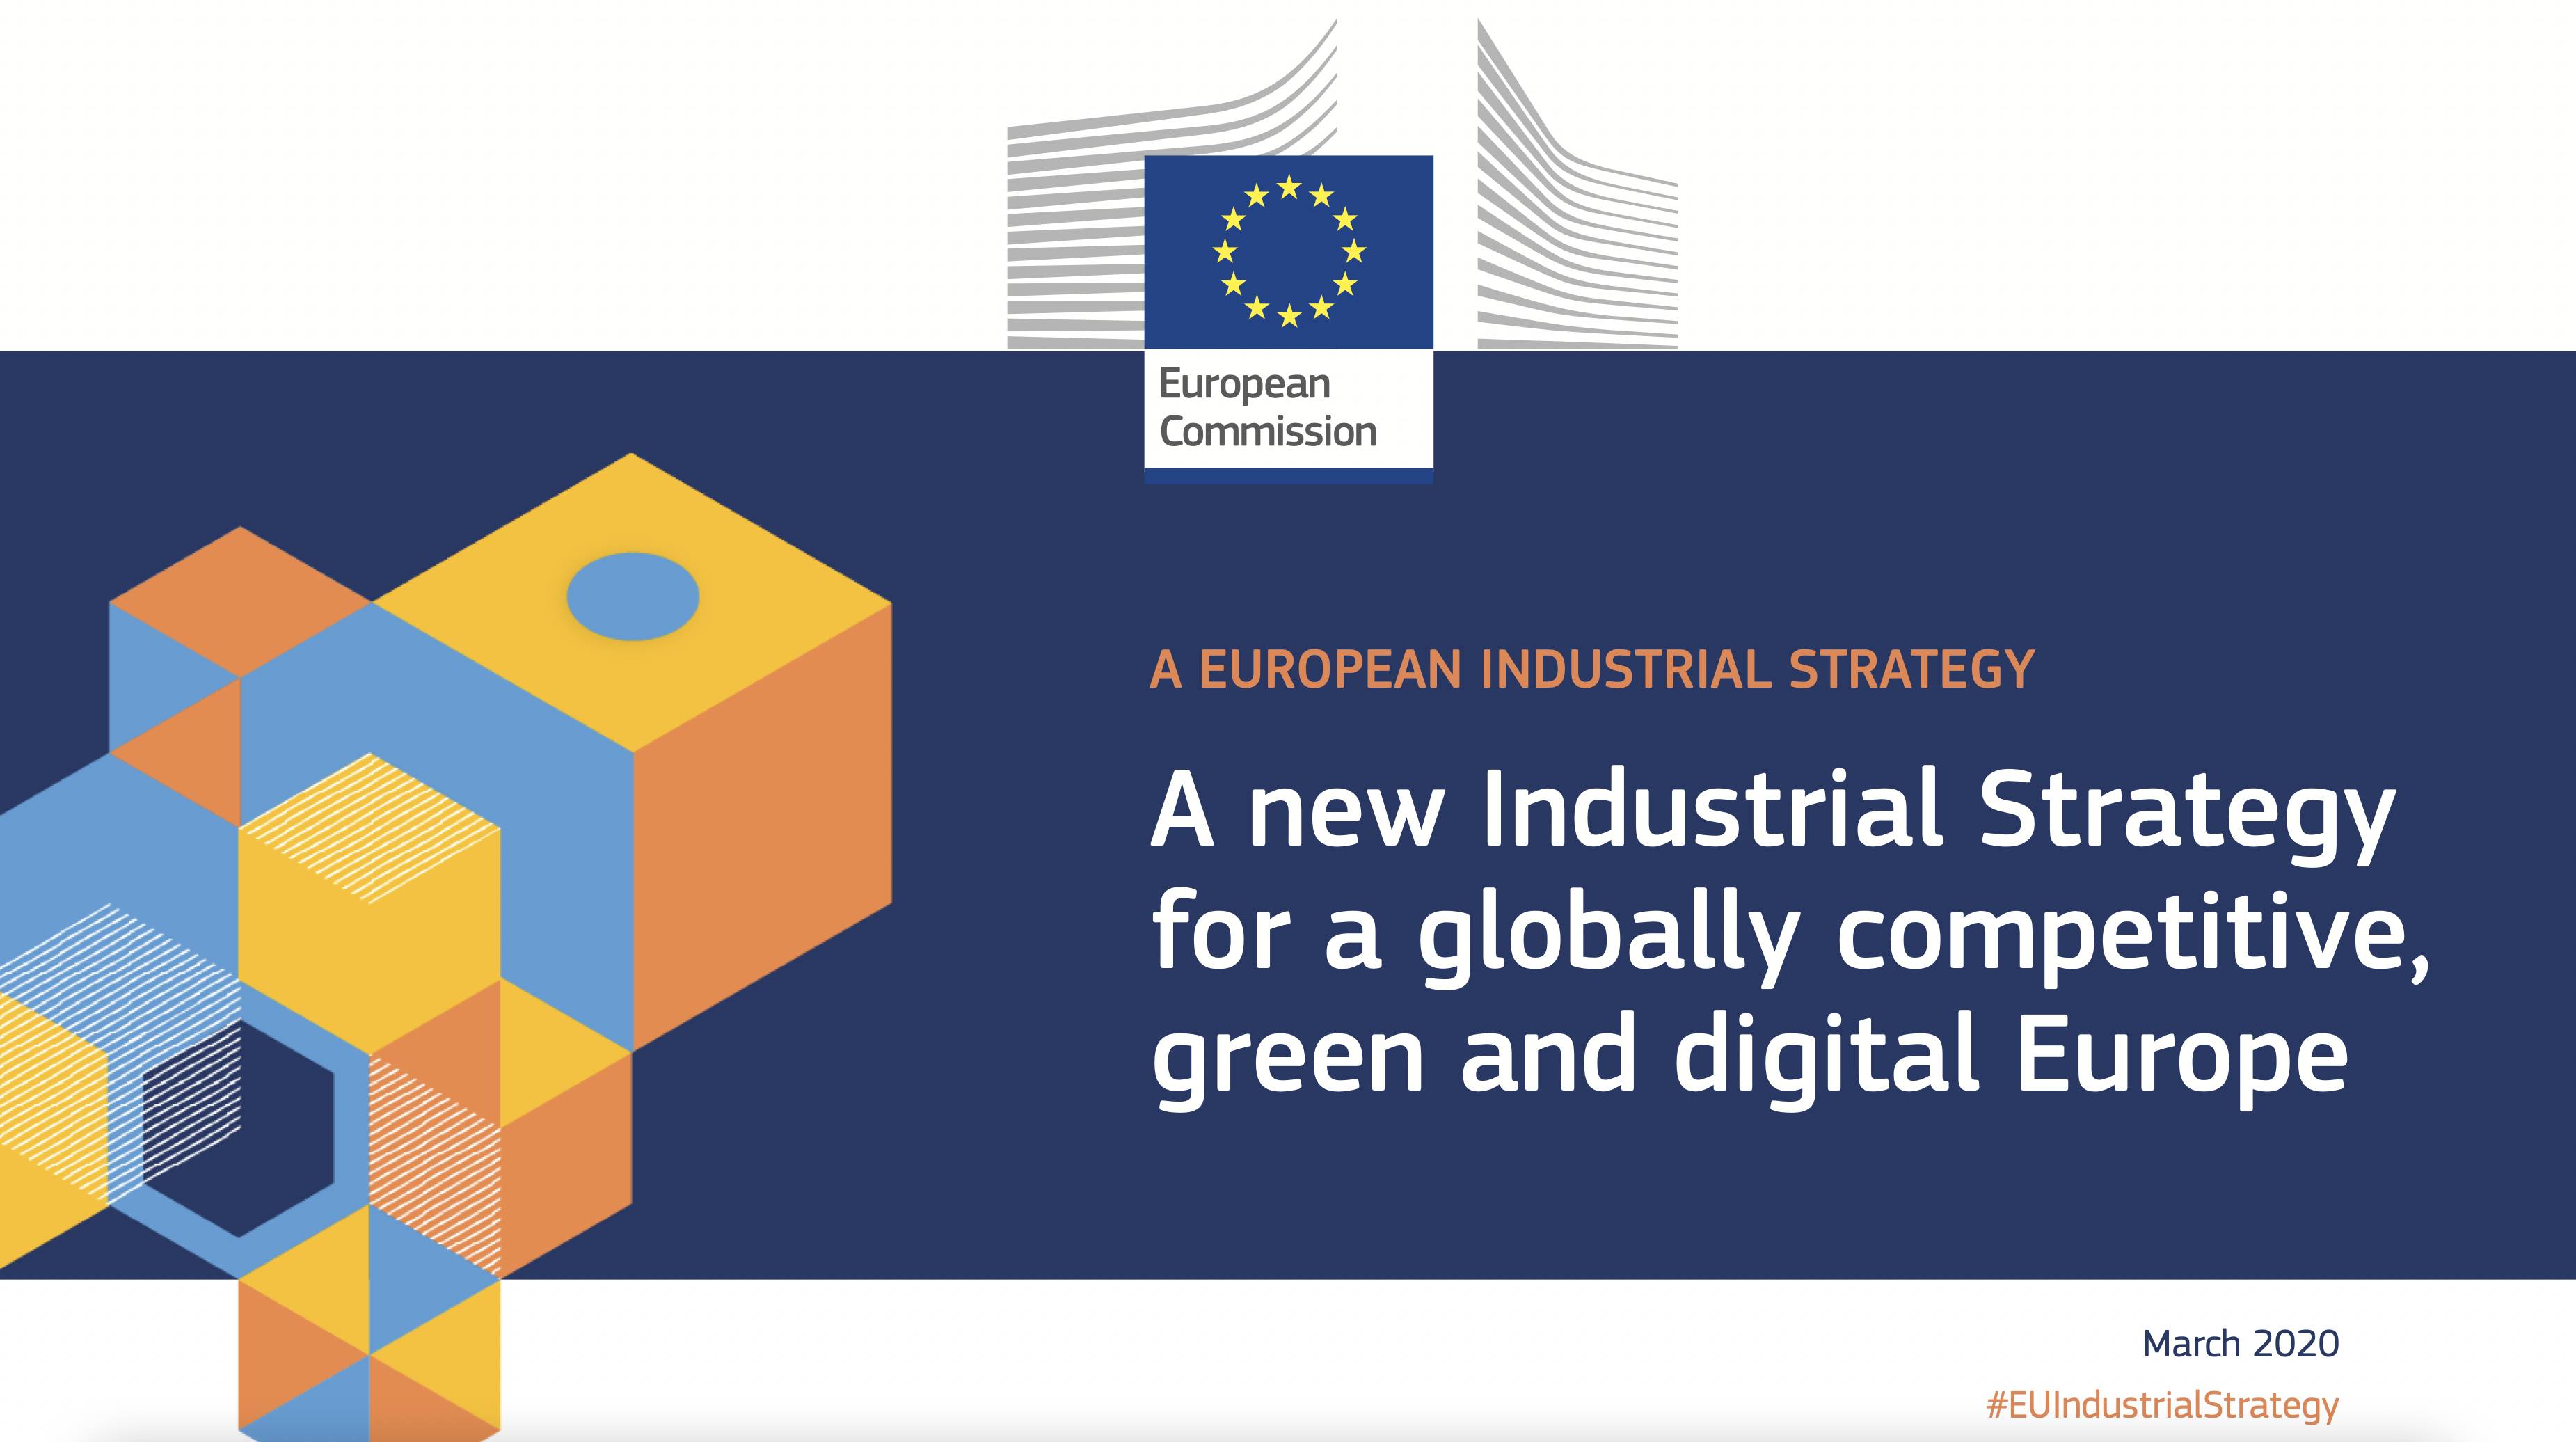 New Industrial Strategy for Europe